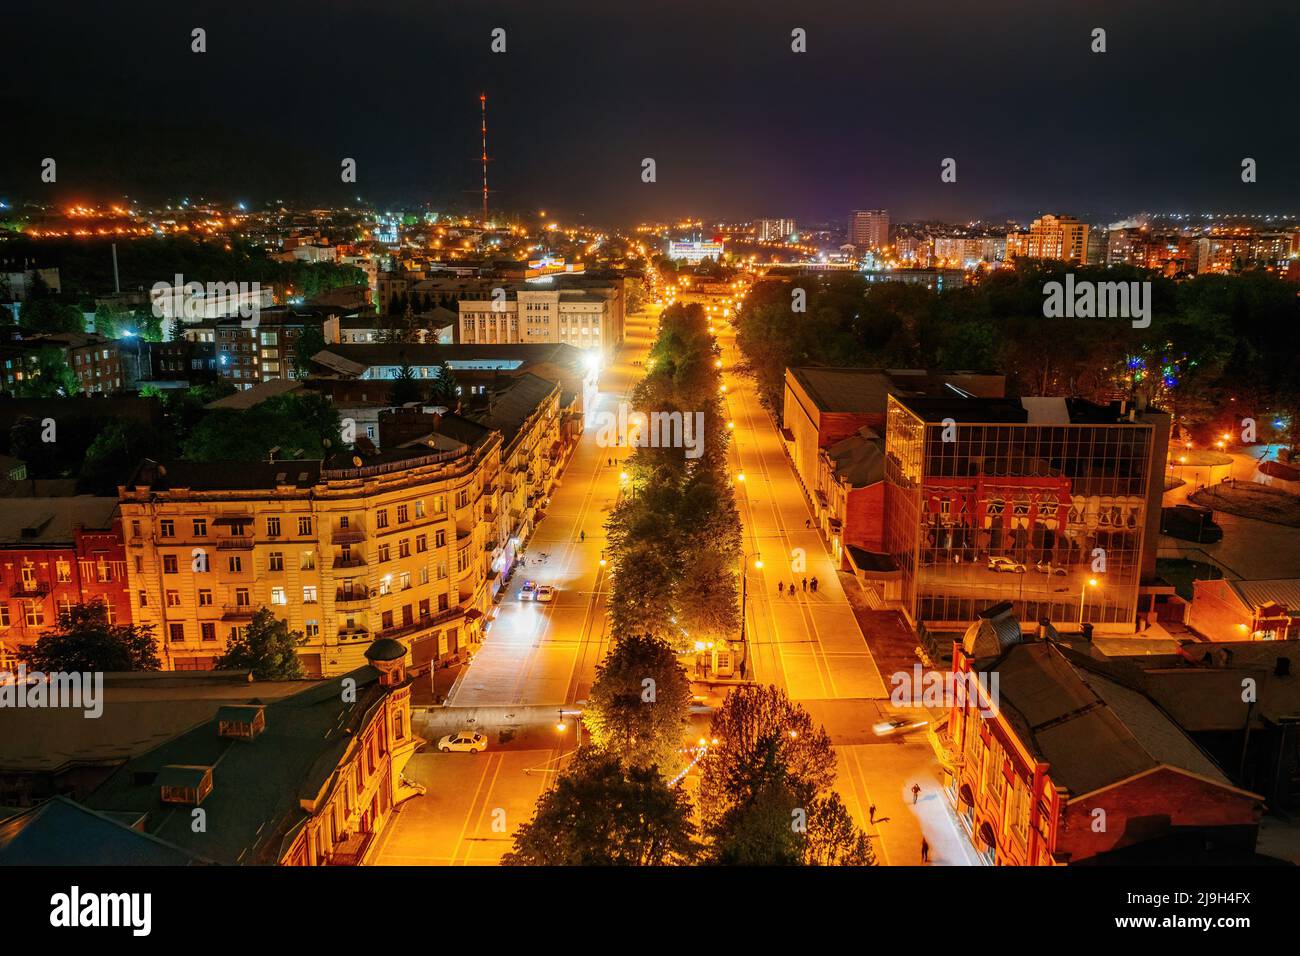 Vladikavkaz, capital of North Ossetia. Historical downtown from drone at night Stock Photo